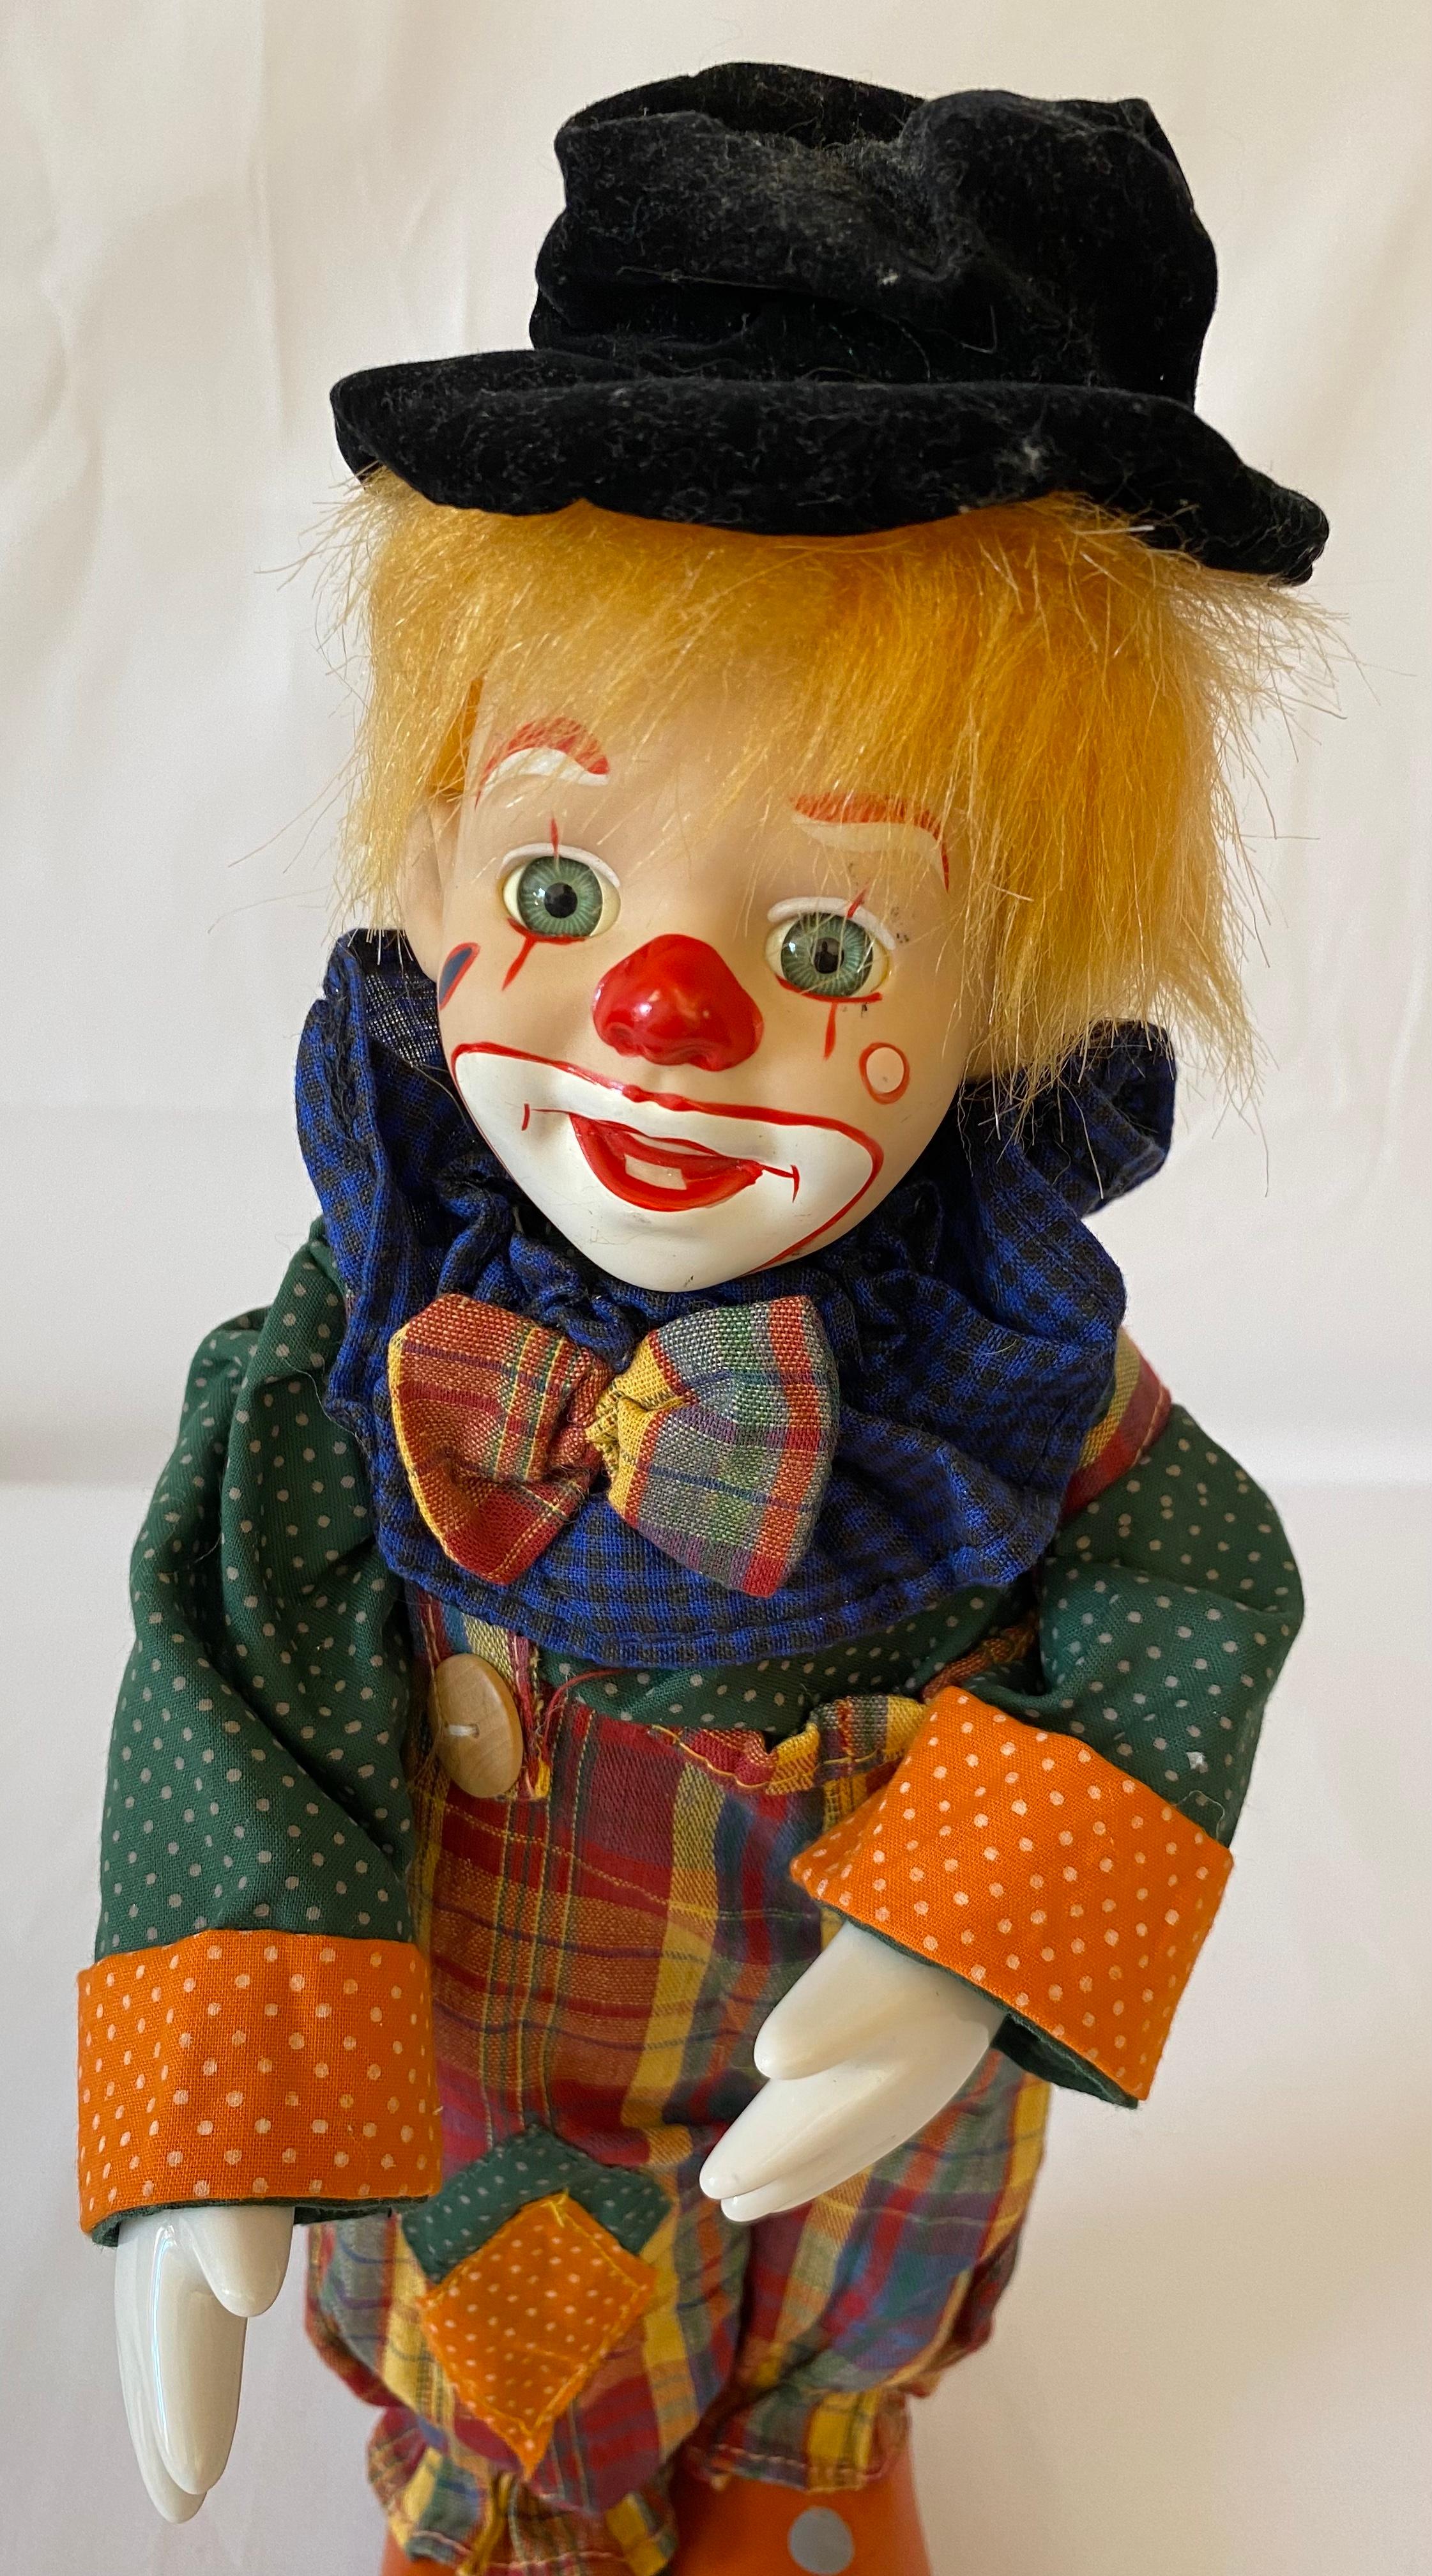 A fine quality therapeutic musical automaton clown toy in wonderful vintage condition.
Features porcelain head, hands and feet. 
Made in France during the 1950s and is in perfect working condition.
Wind-up to hear the delightful music of this